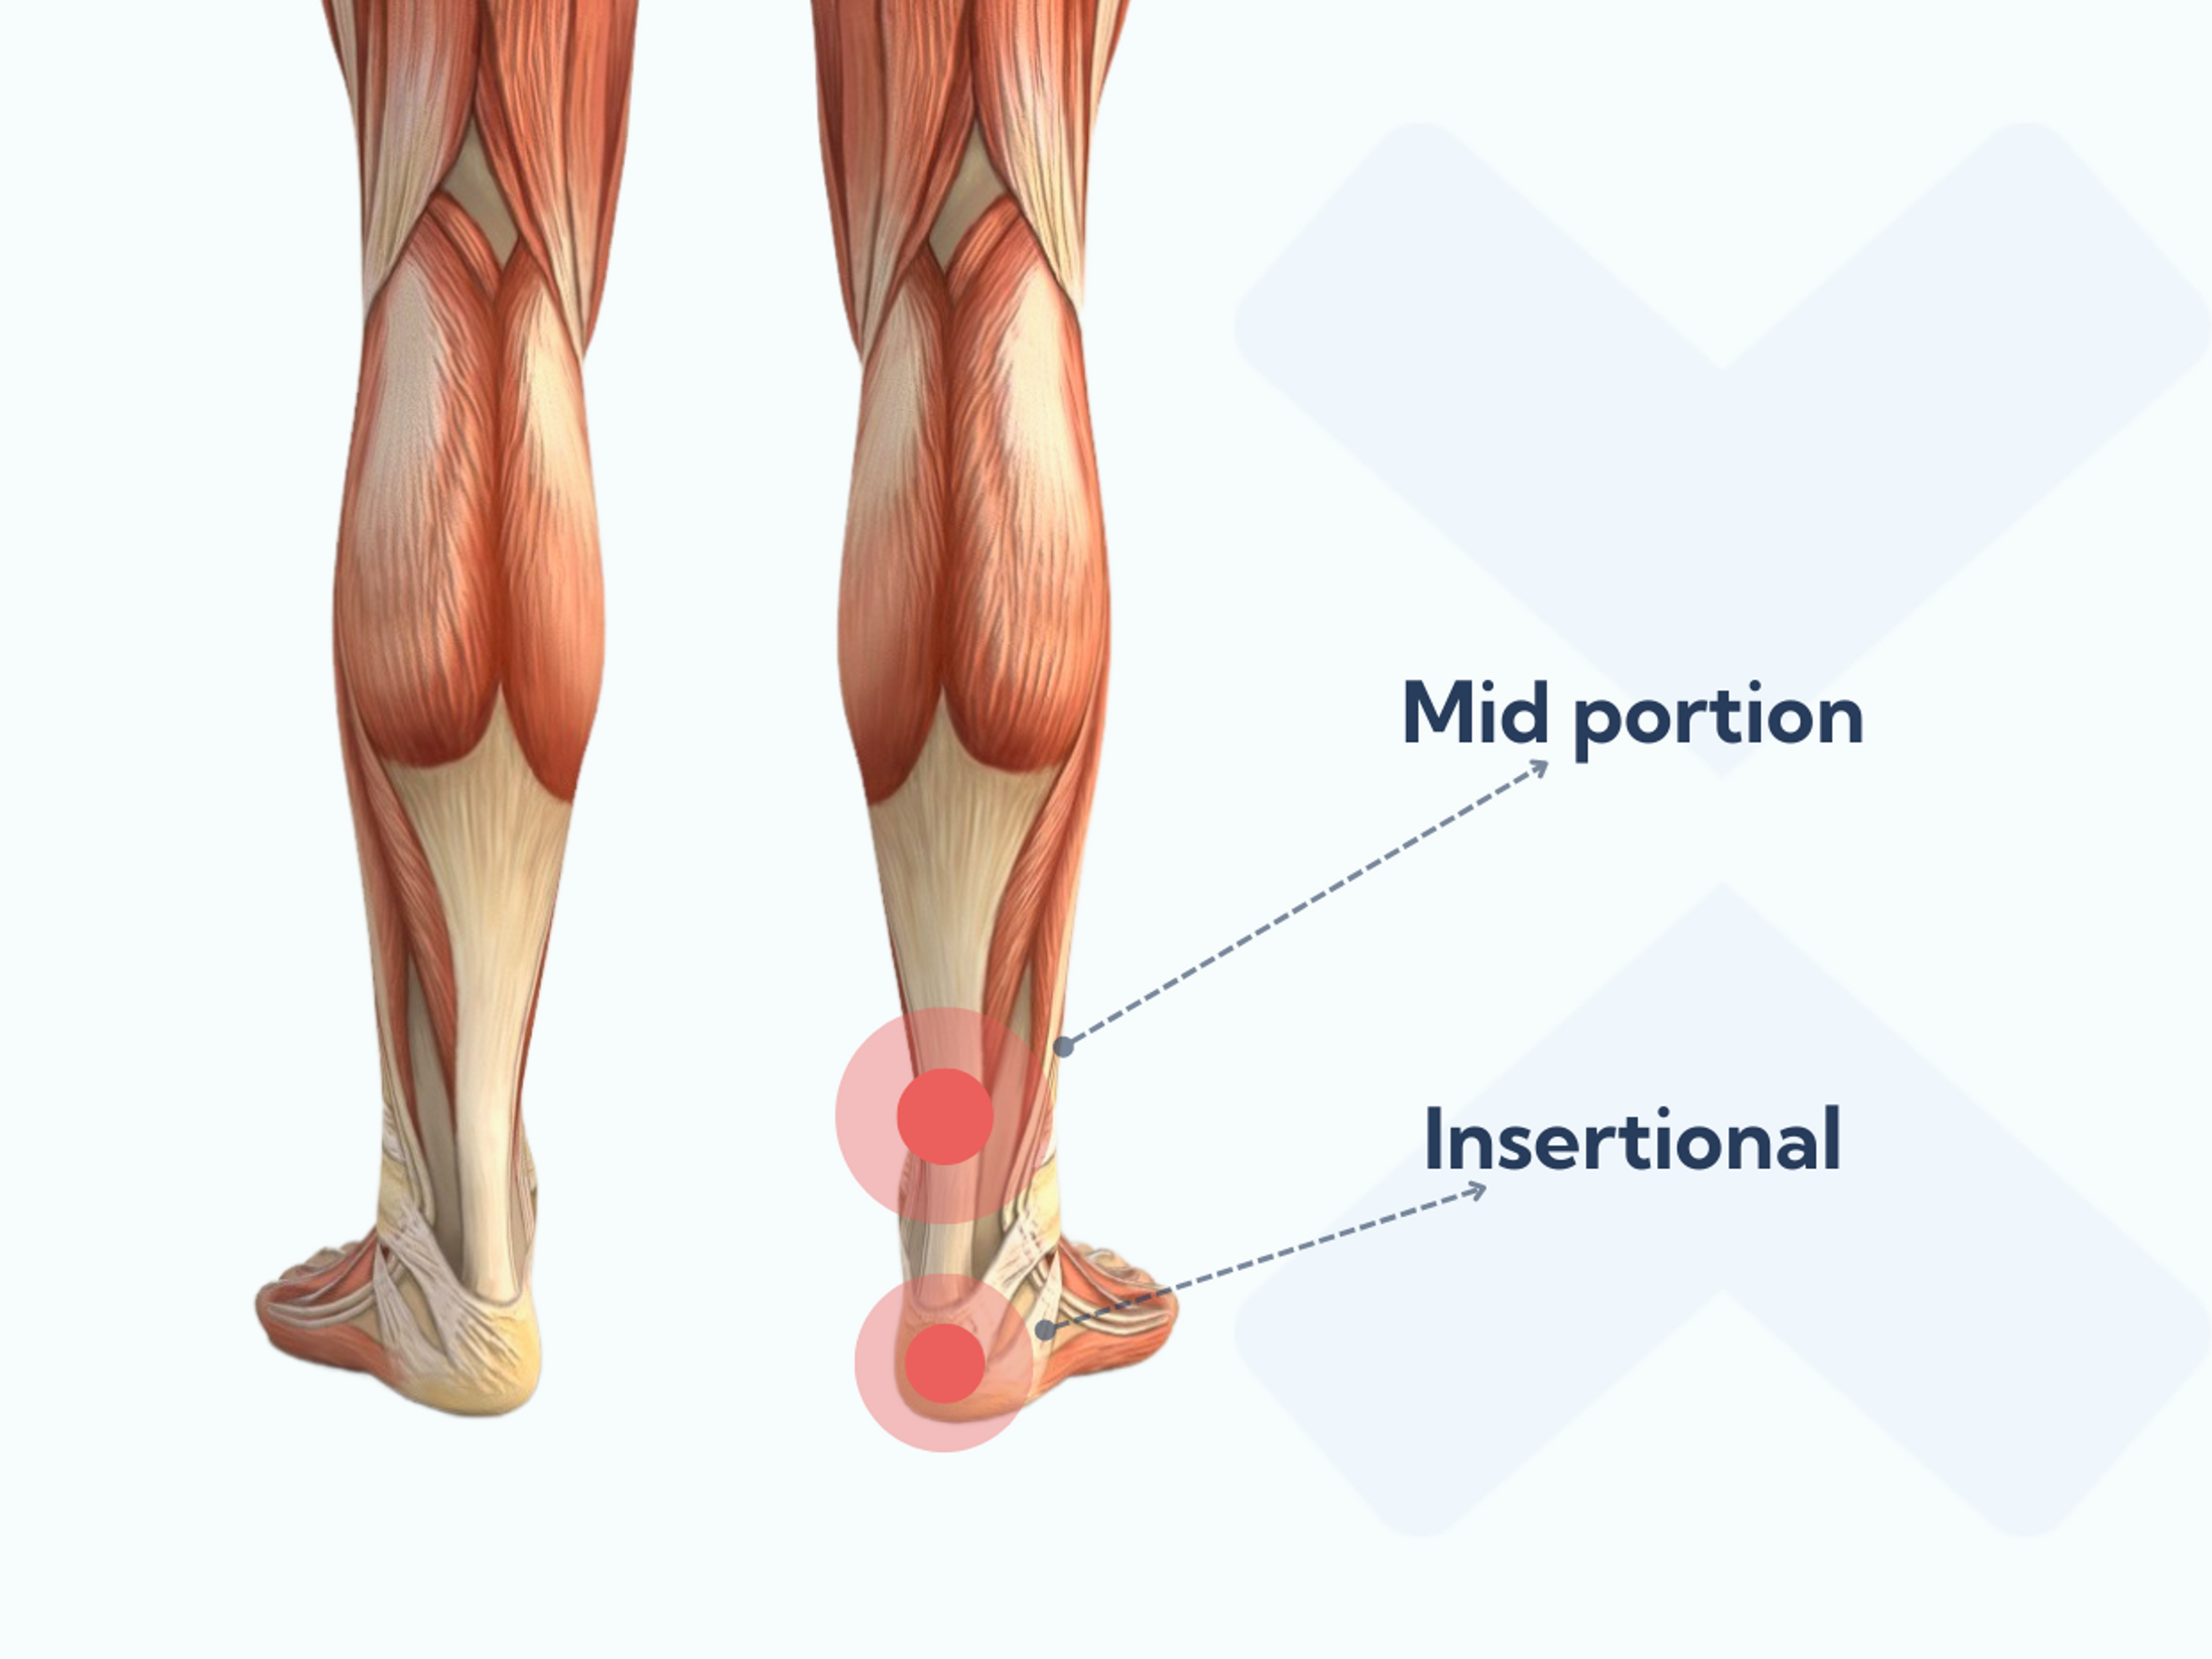 Mid-portion Achilles tendonitis develops about 5cm above the heel bone while insertional Achilles tendonitis develops where the tendon attaches into the heel bone.